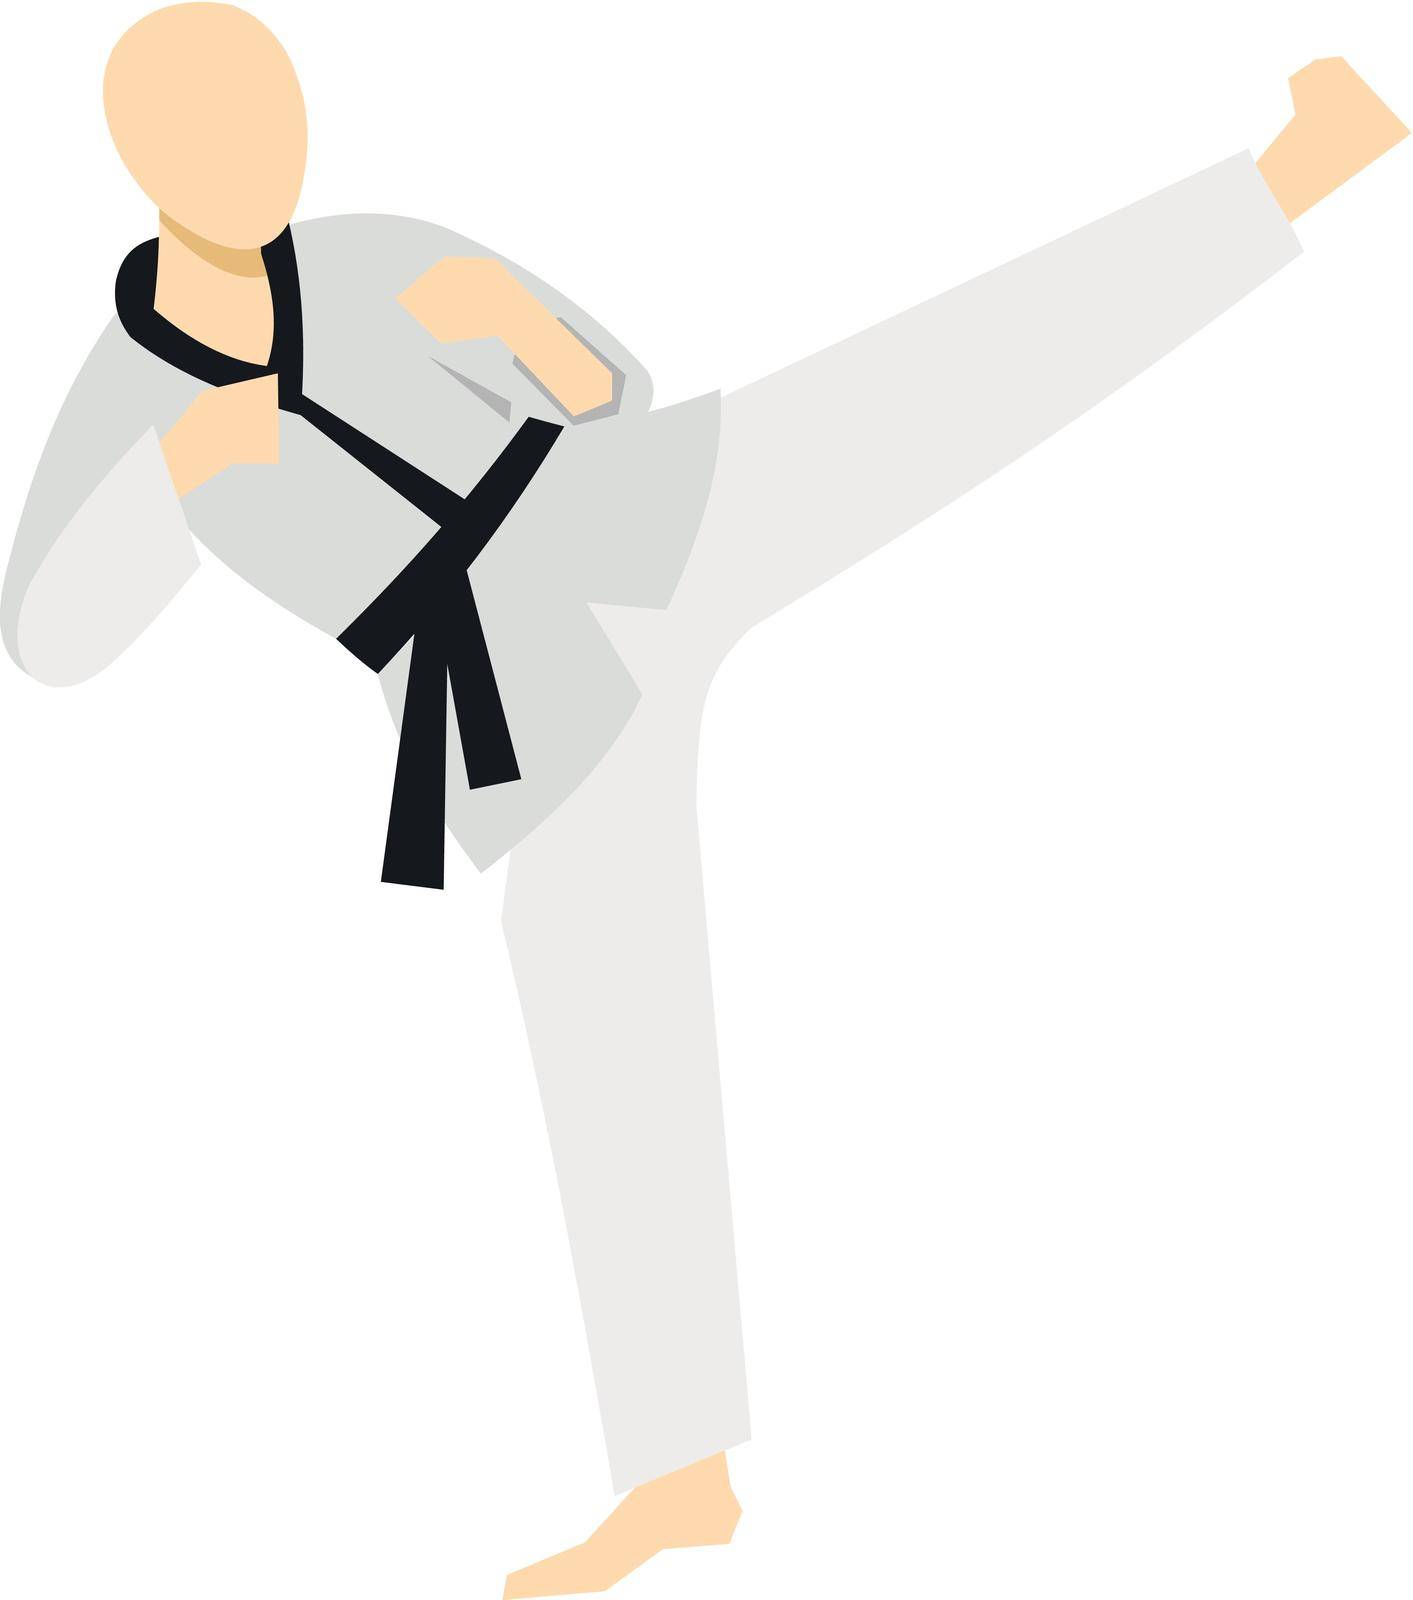 Wushu fighting style icon in flat style on a white background